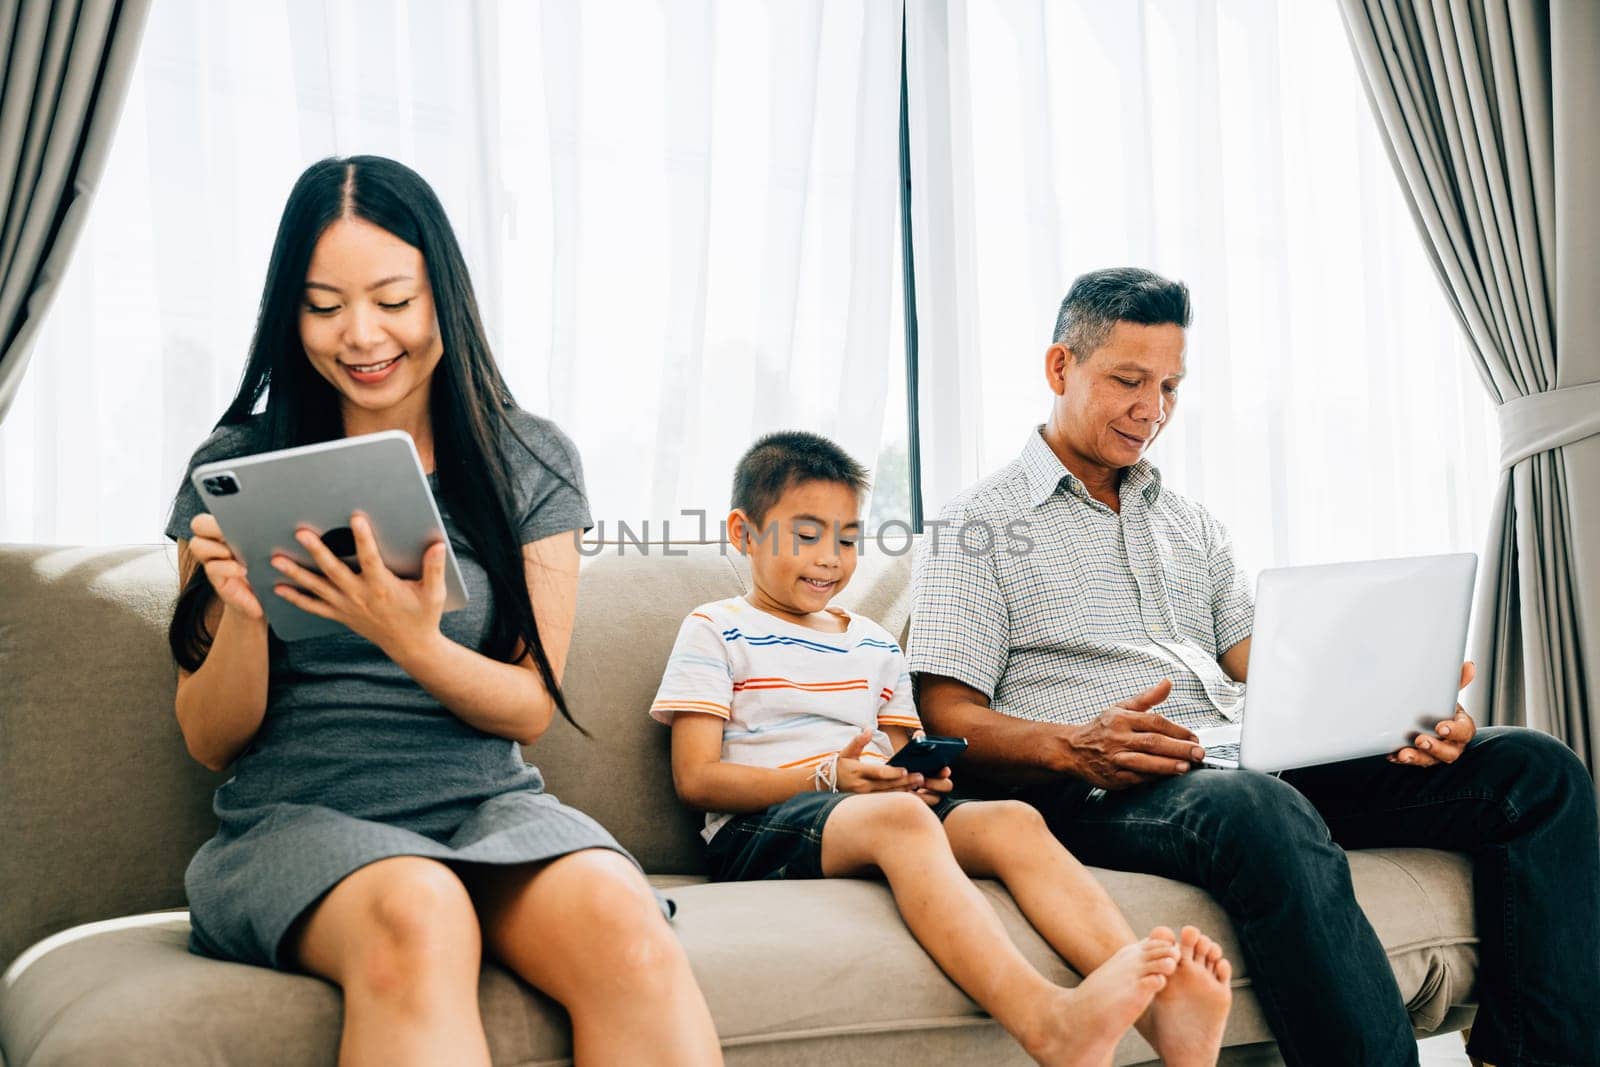 Parents kids engaged with laptops and phones ignoring familial bonding. An Asian family's device dependence portrays the challenges of internet addiction. ignores togetherness